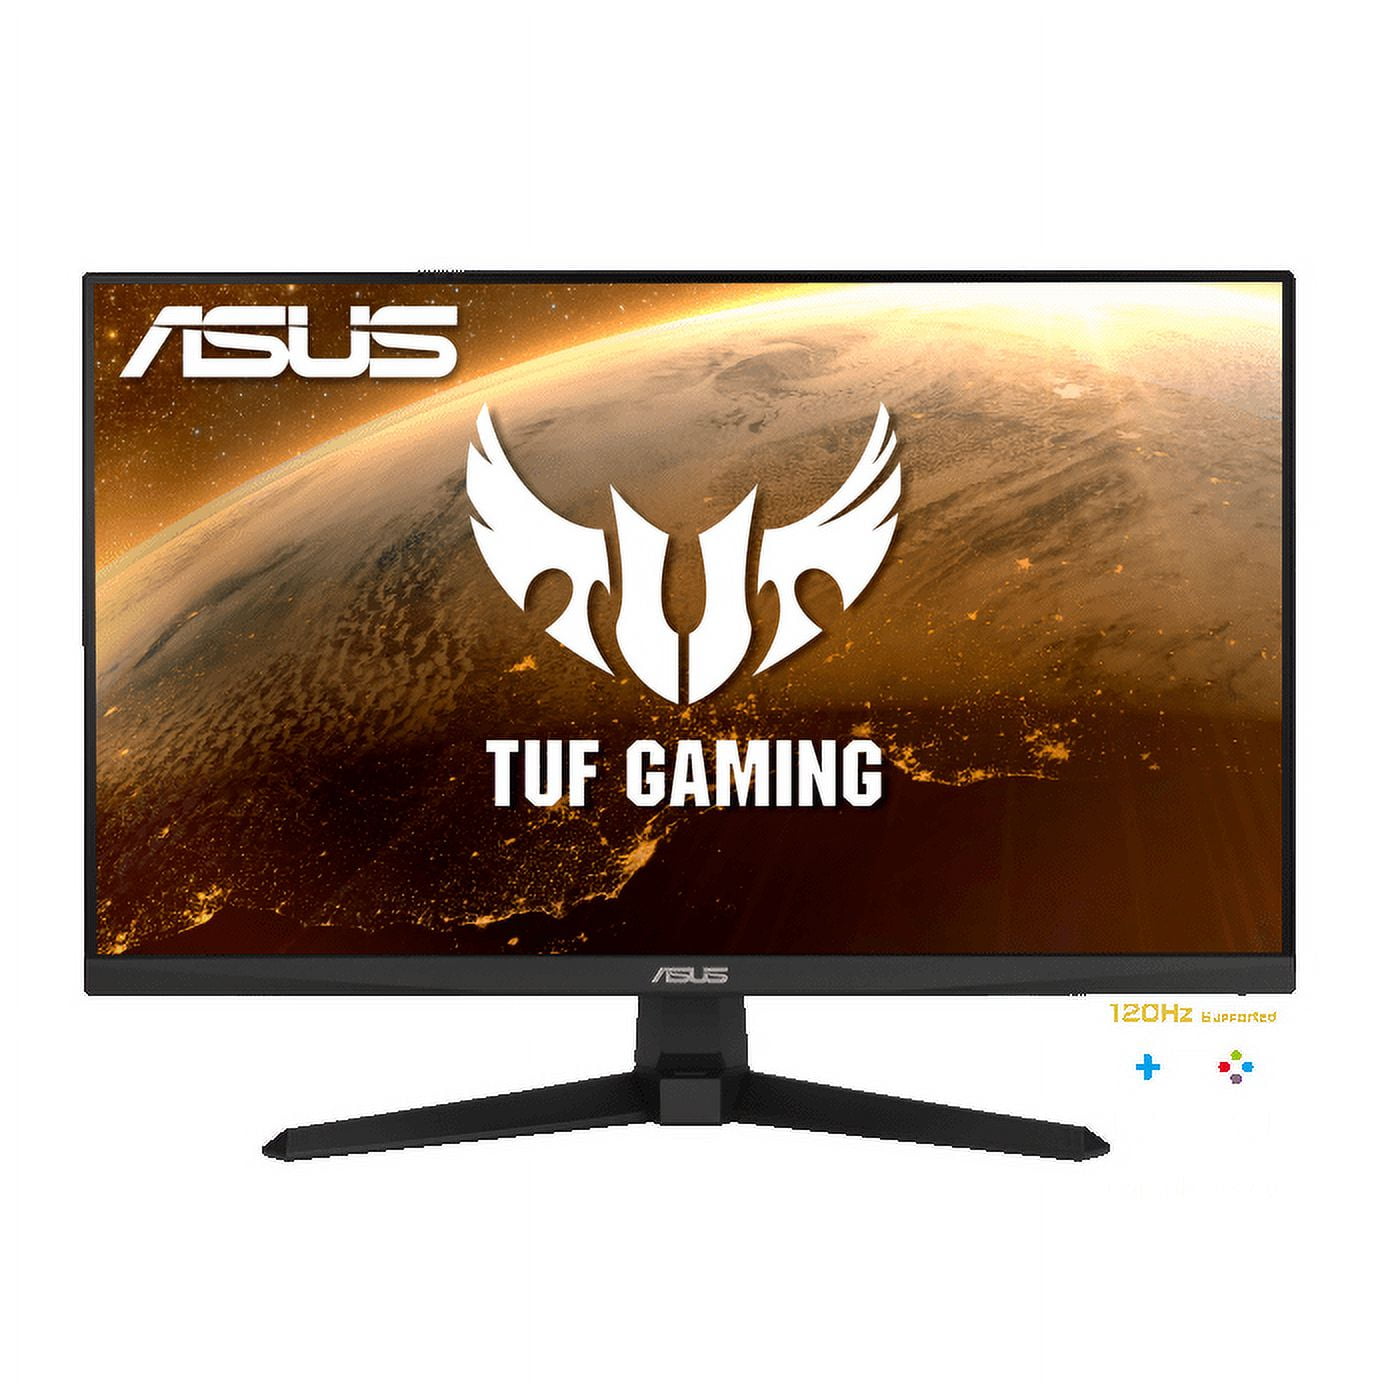 Picture of Asus VG247Q1A 23.8 in. 1920 x 1080 16 isto 9 1ms 2xHDMI Speaker DisplayPort Gaming Monitor